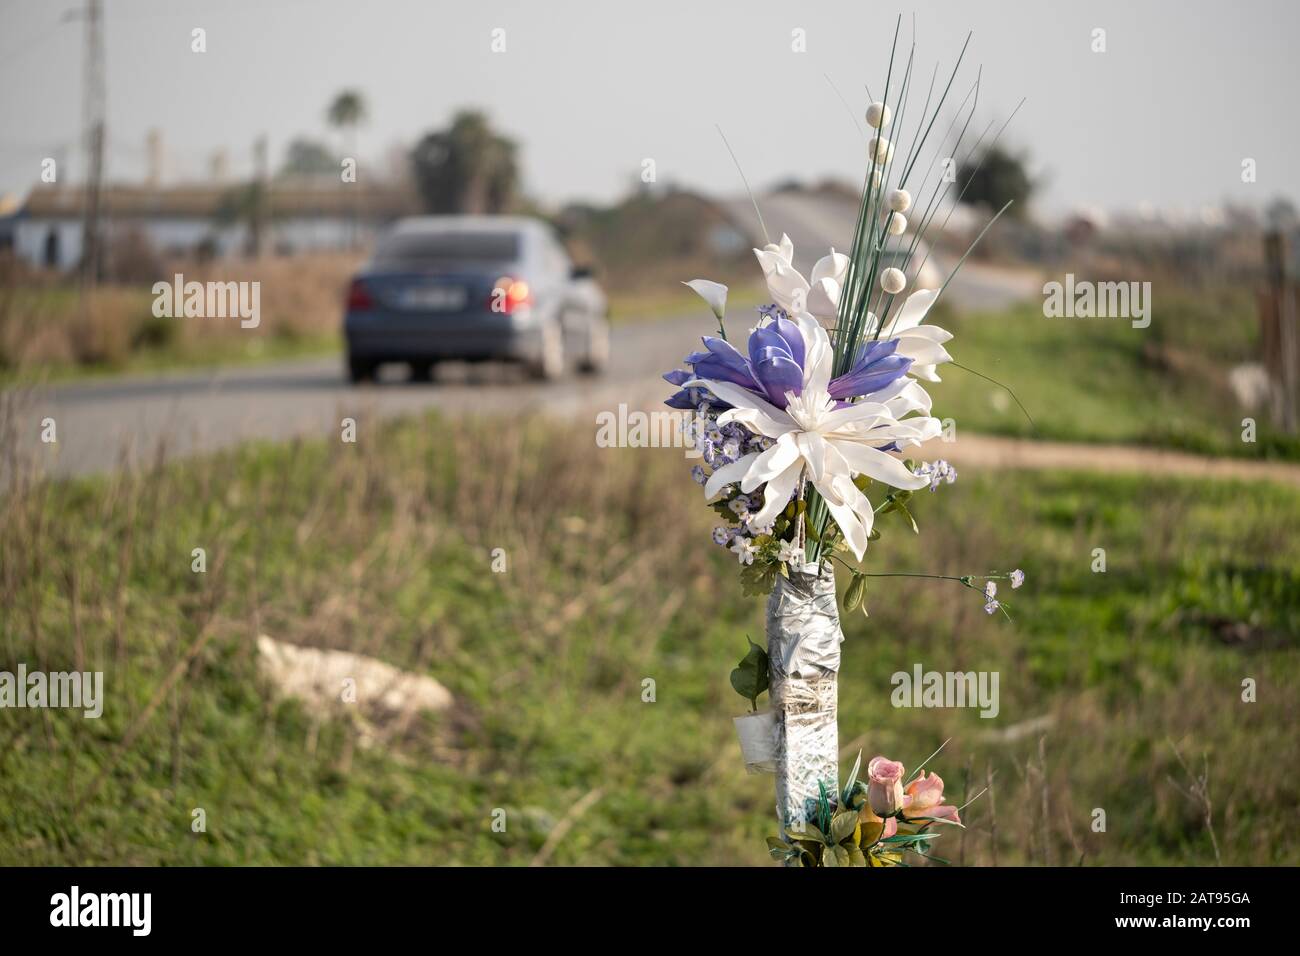 Memorial bouquet at the site of a road accident Stock Photo